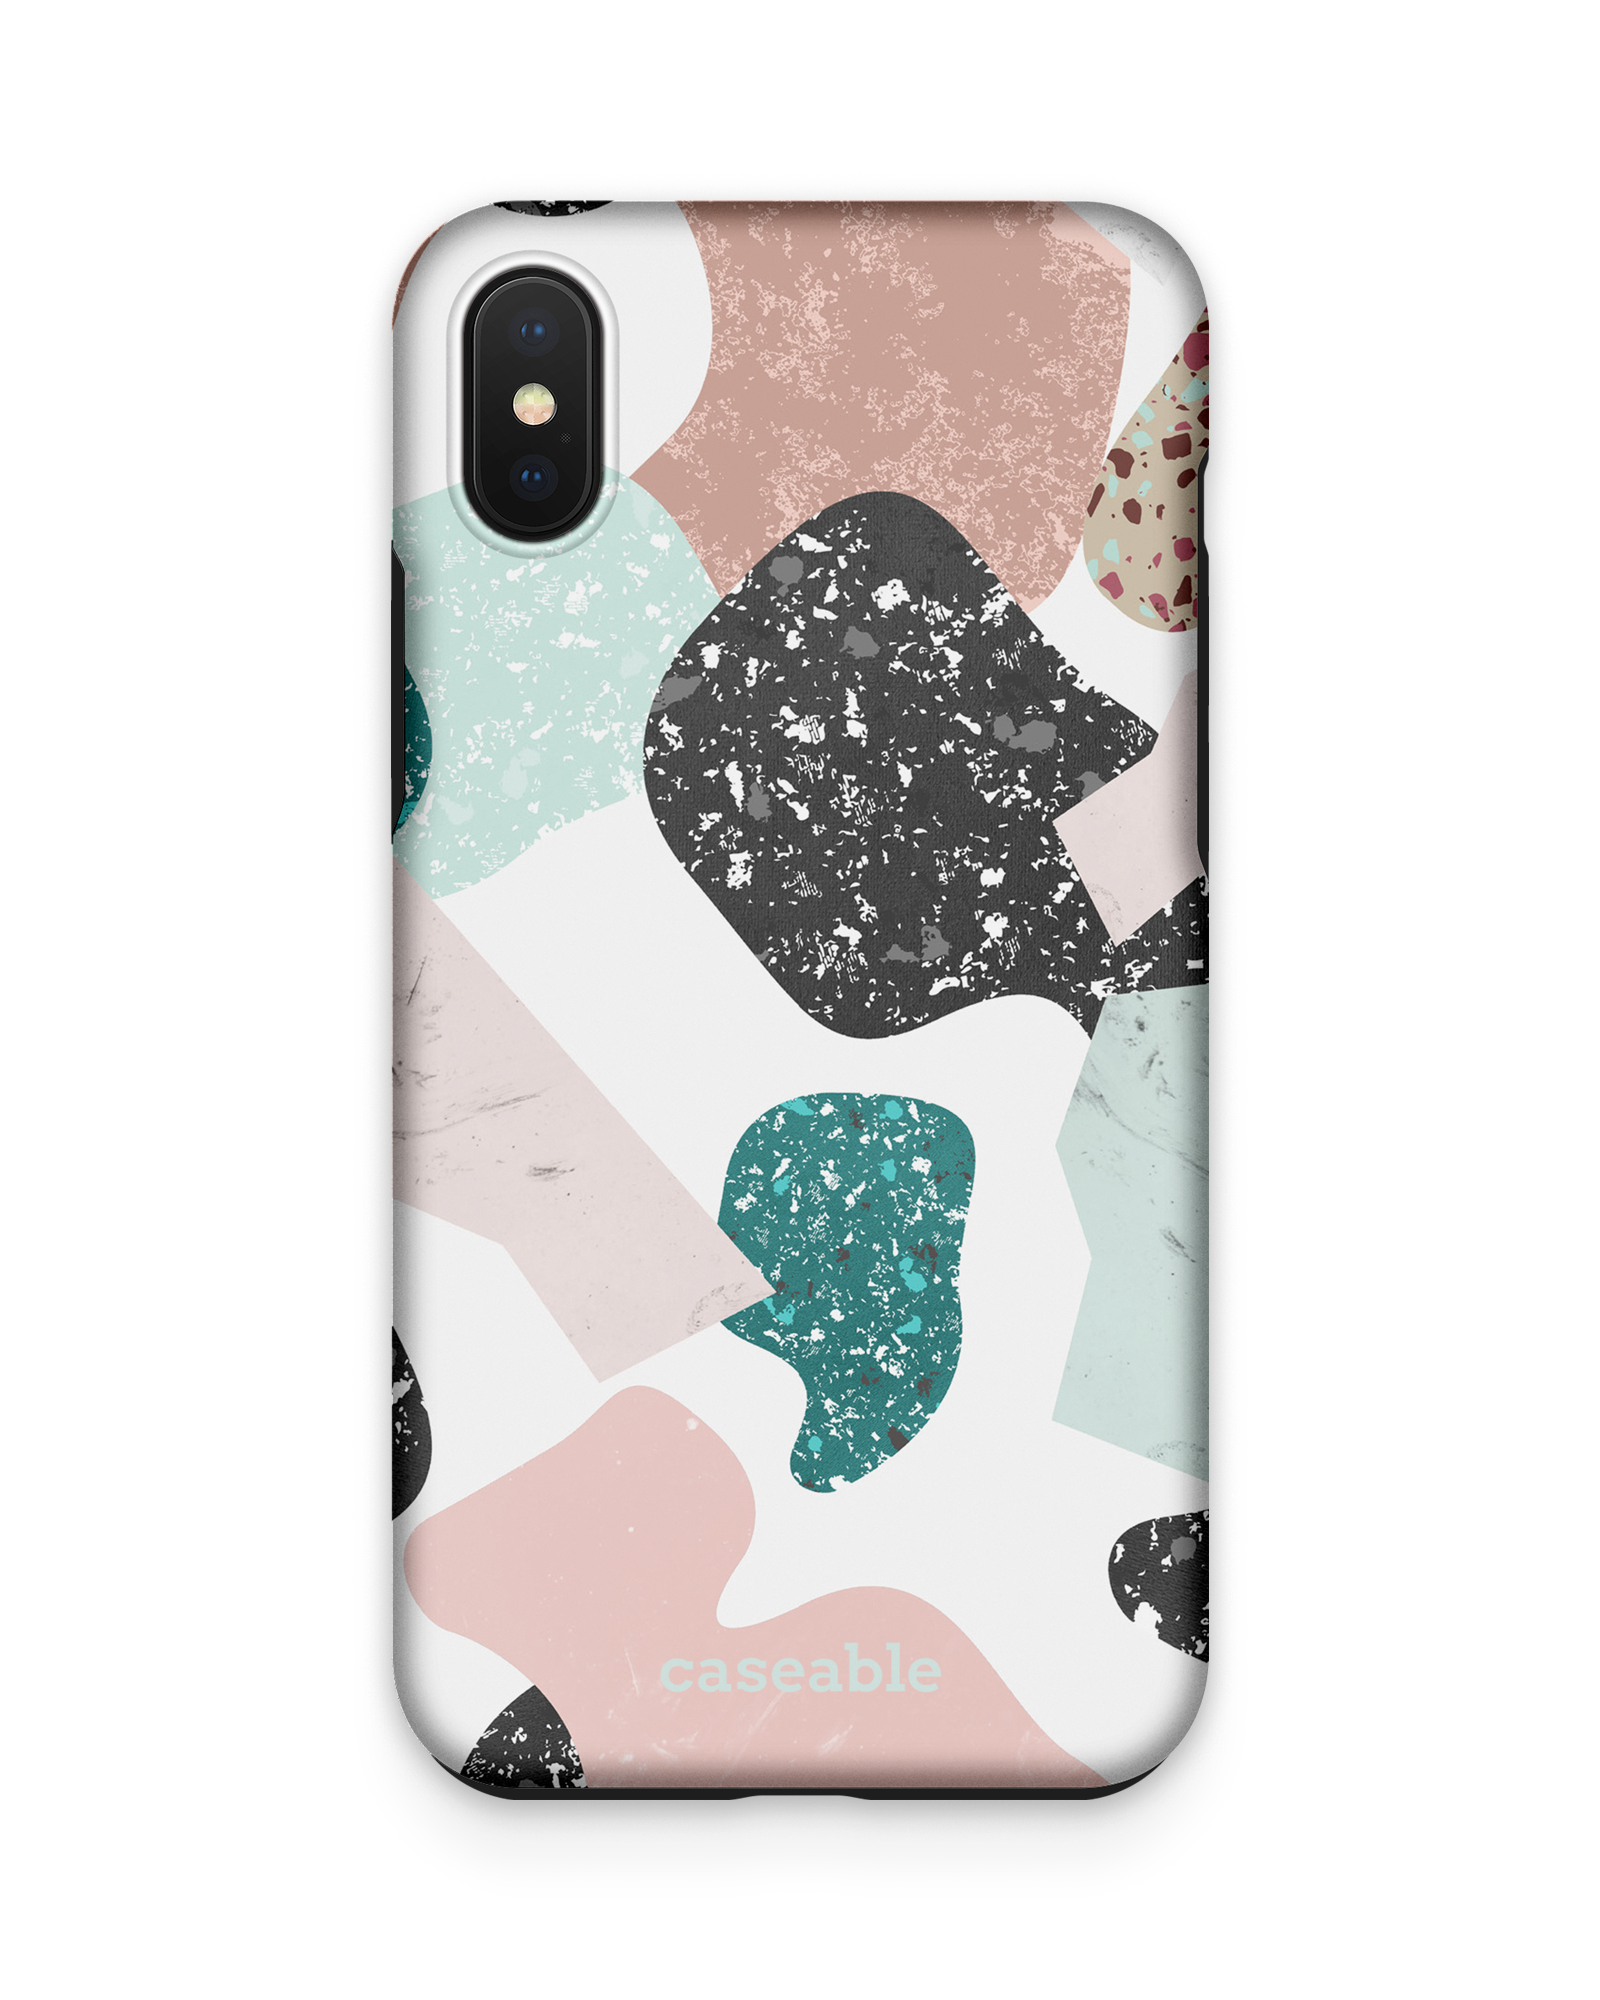 Scattered Shapes Premium Phone Case Apple iPhone XS Max